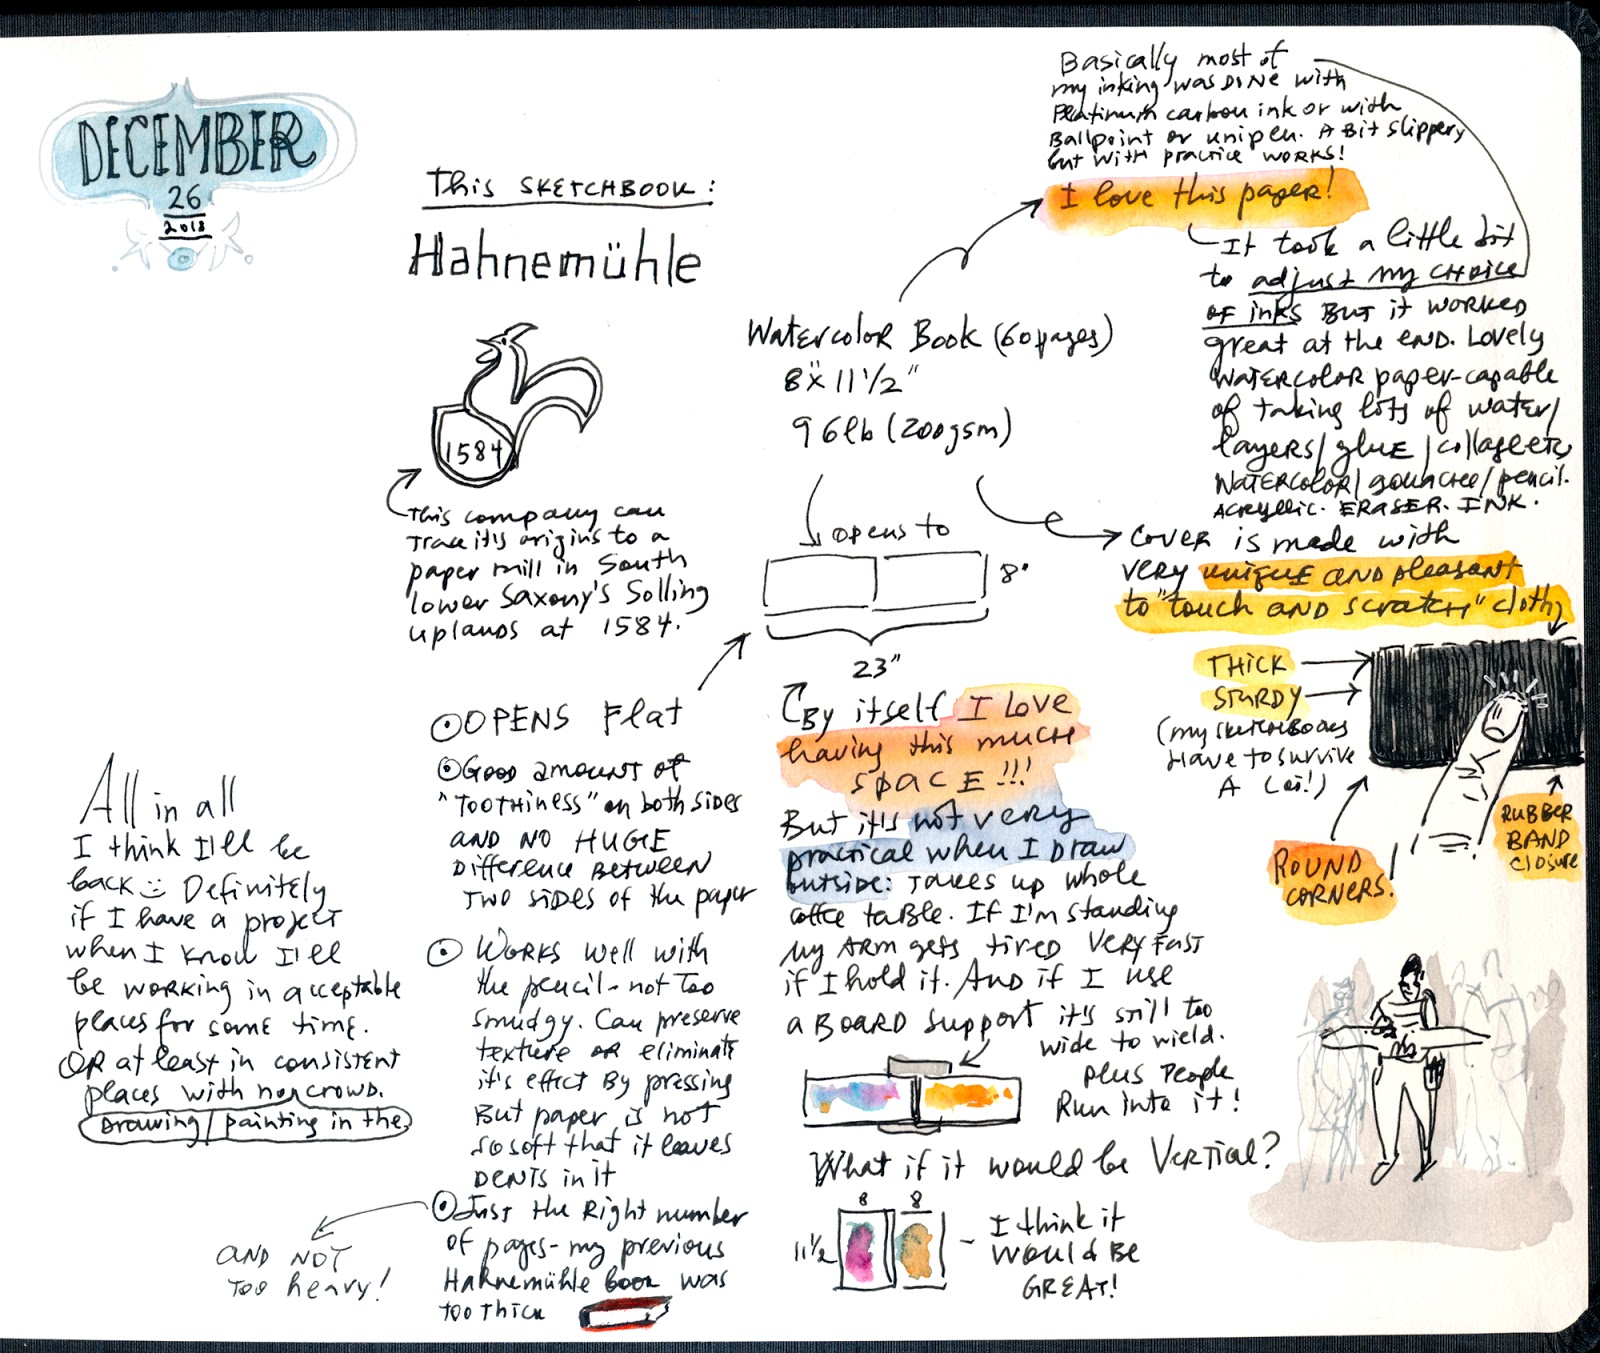 Apple-Pine: The end of Sketchbook #118 and my review of Hahnemuhle  Watercolor Book